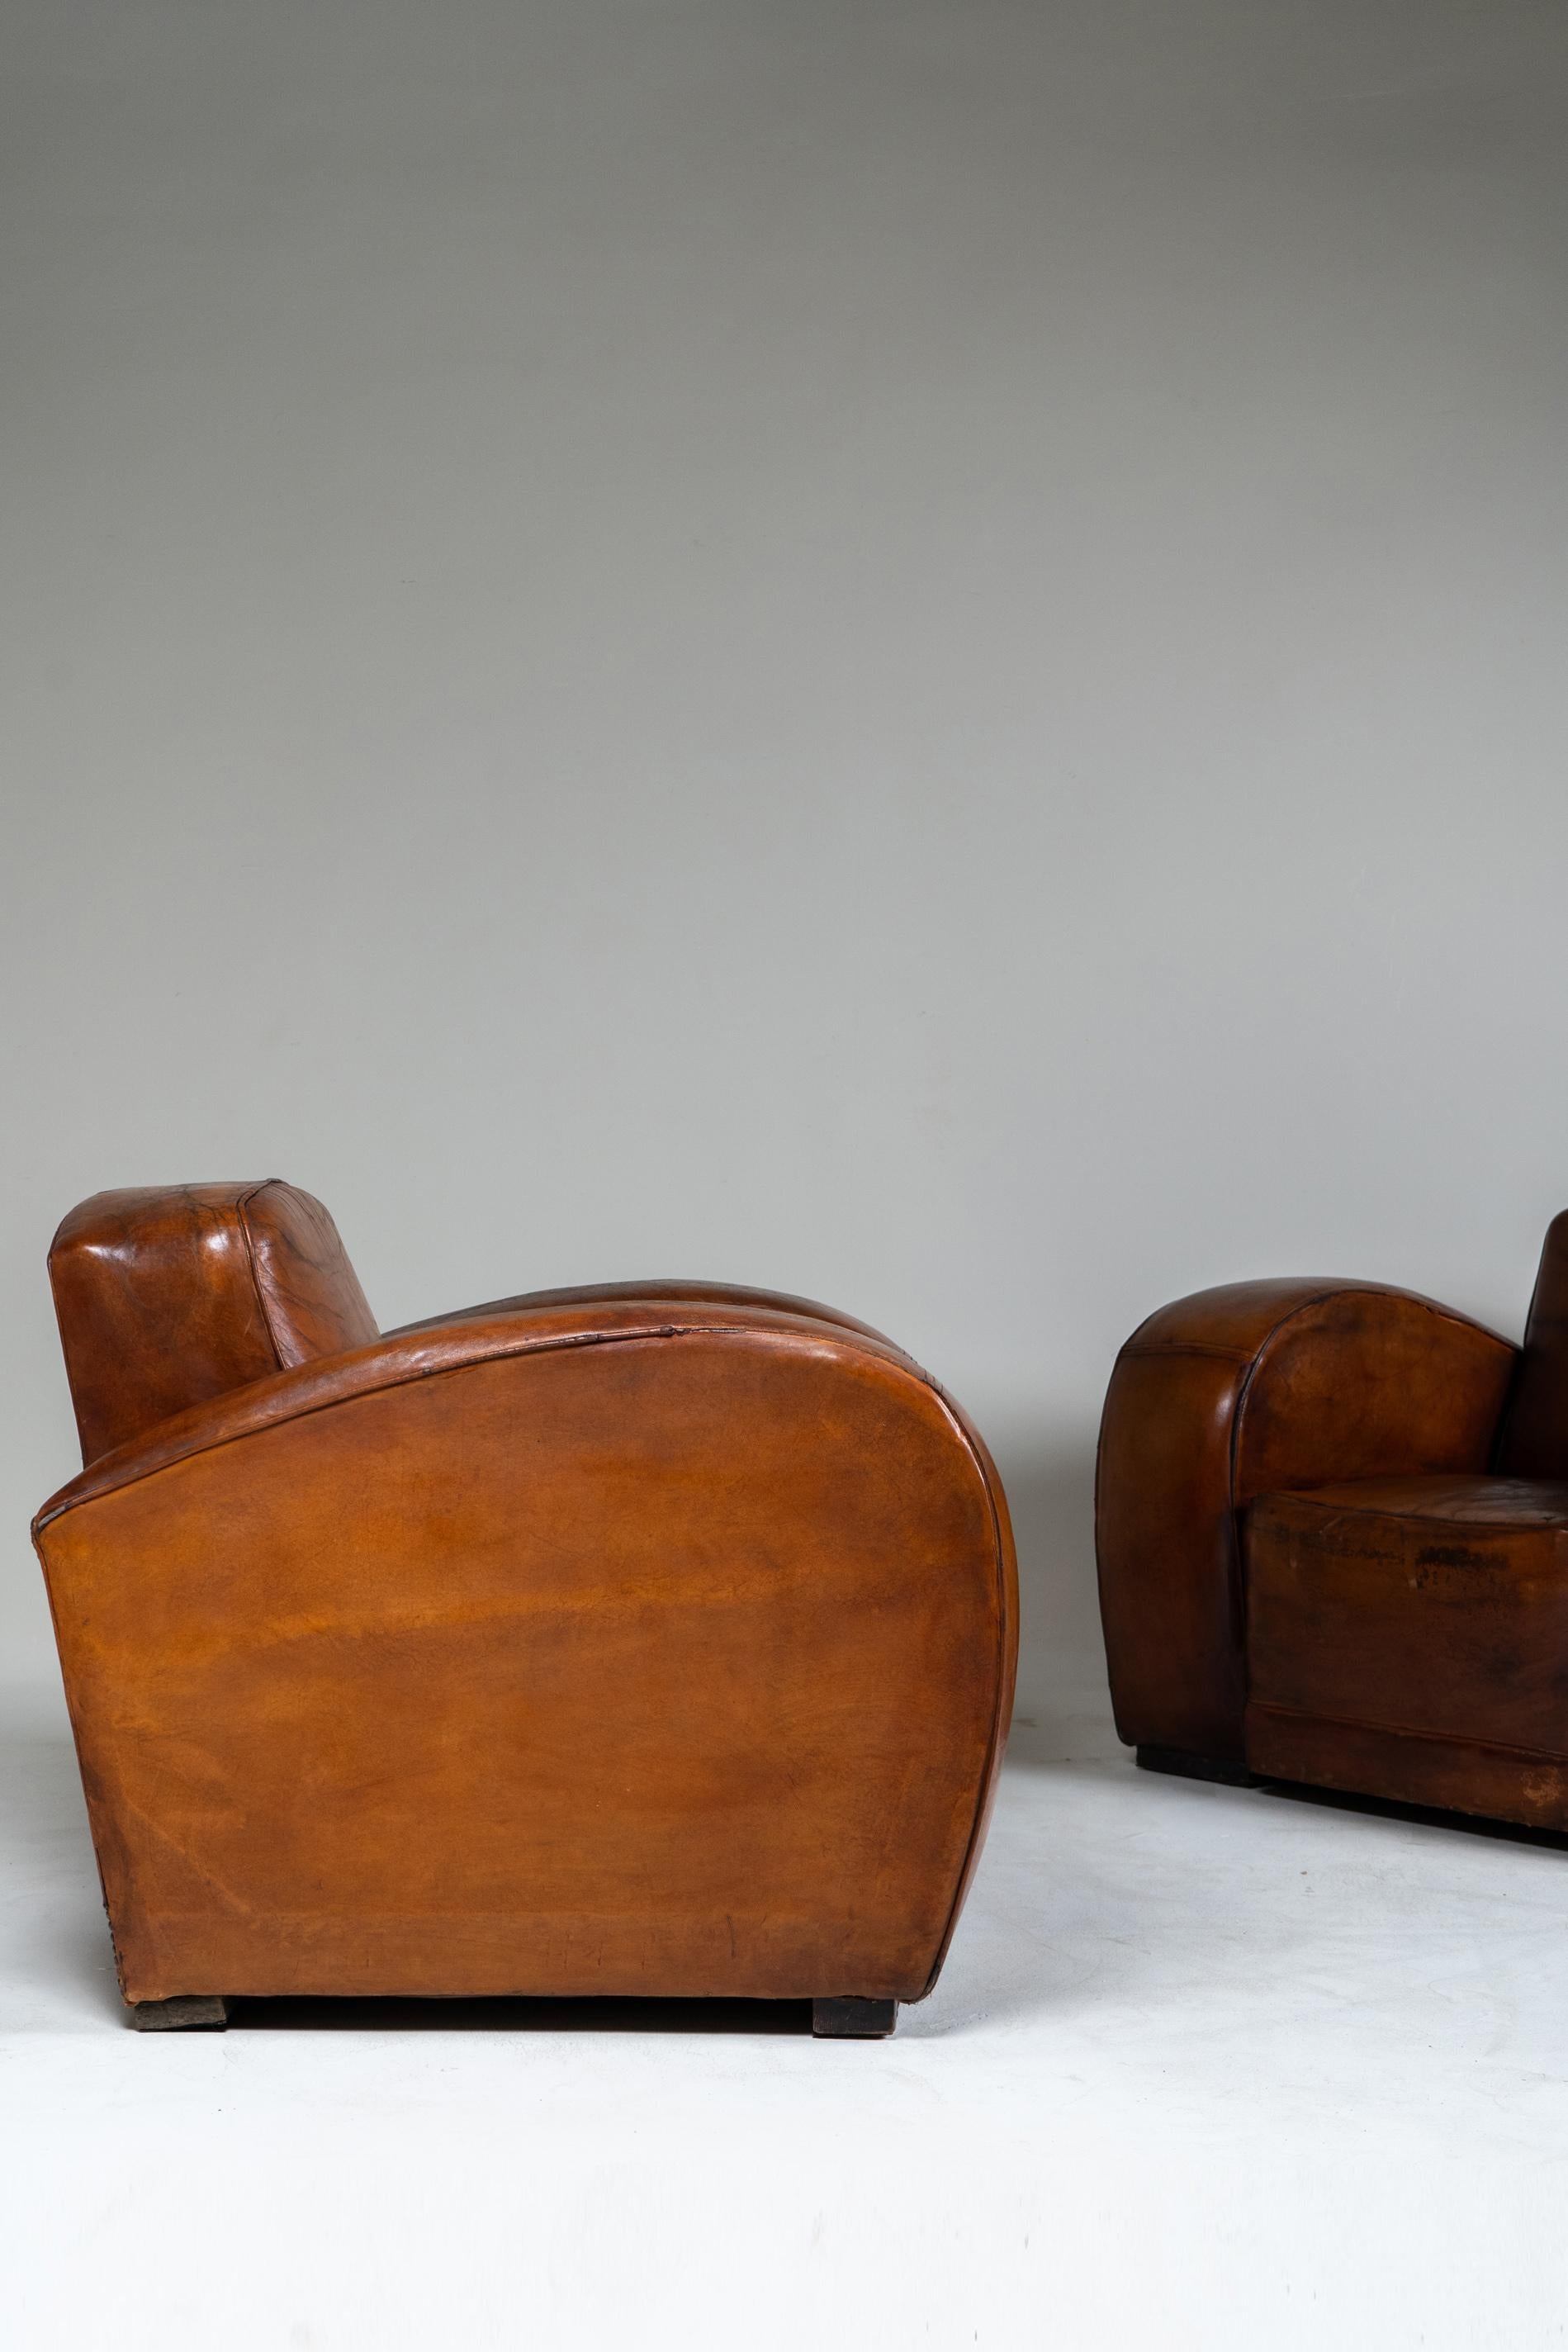 A Pair of Art Deco Leather Club Chairs, France c.1930 For Sale 11